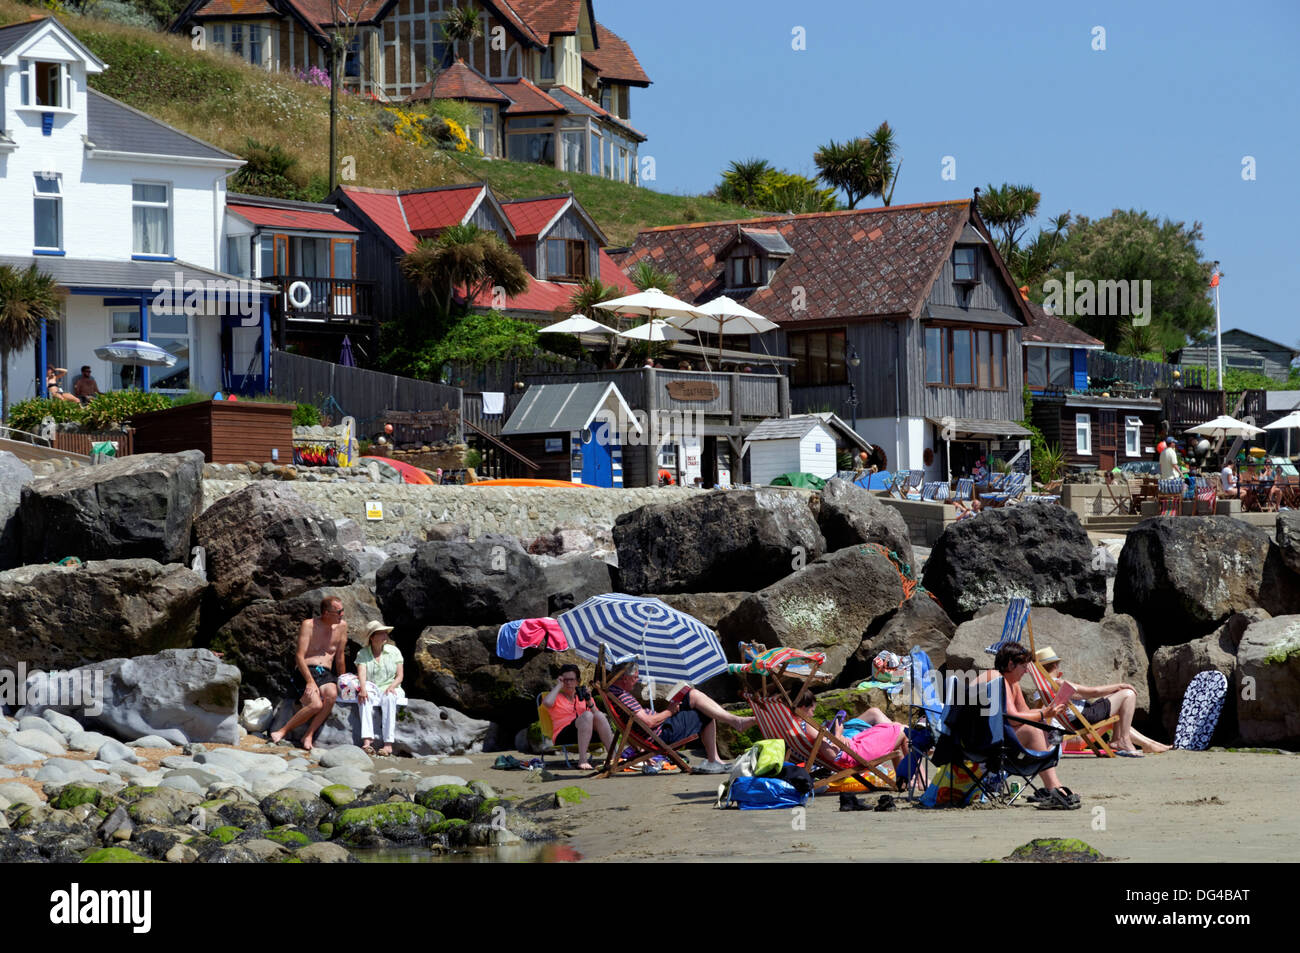 Family on Beach, Steephill Cove,Whitwell, Ventnor, Isle of Wight, England, UK. Stock Photo